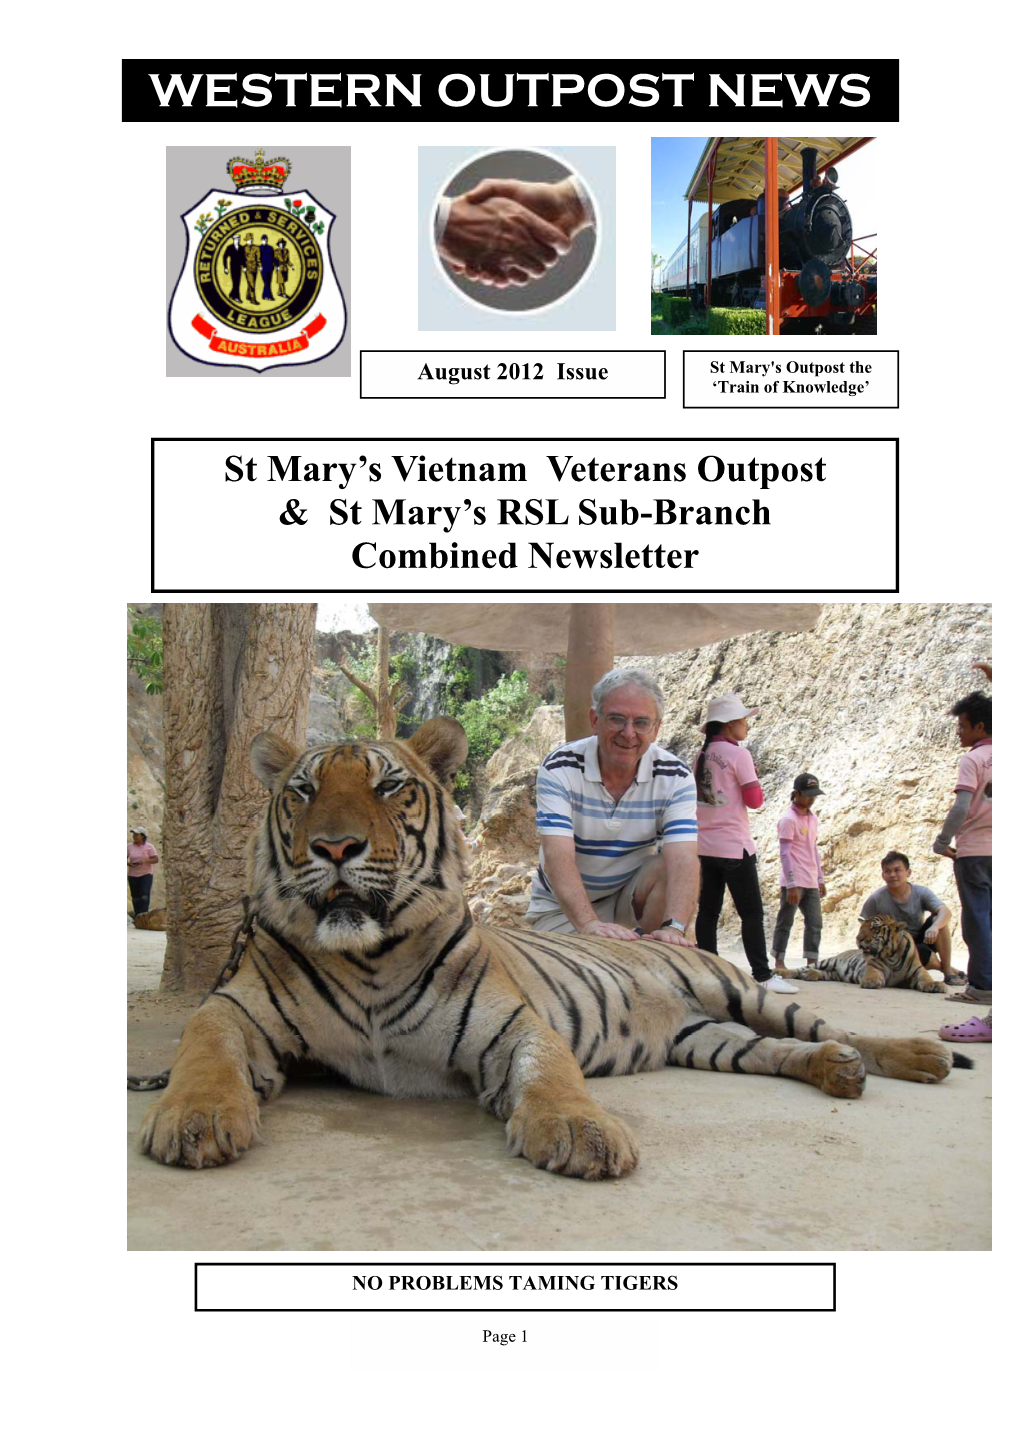 August 2012 Issue St Mary's Outpost the ‘Train of Knowledge’